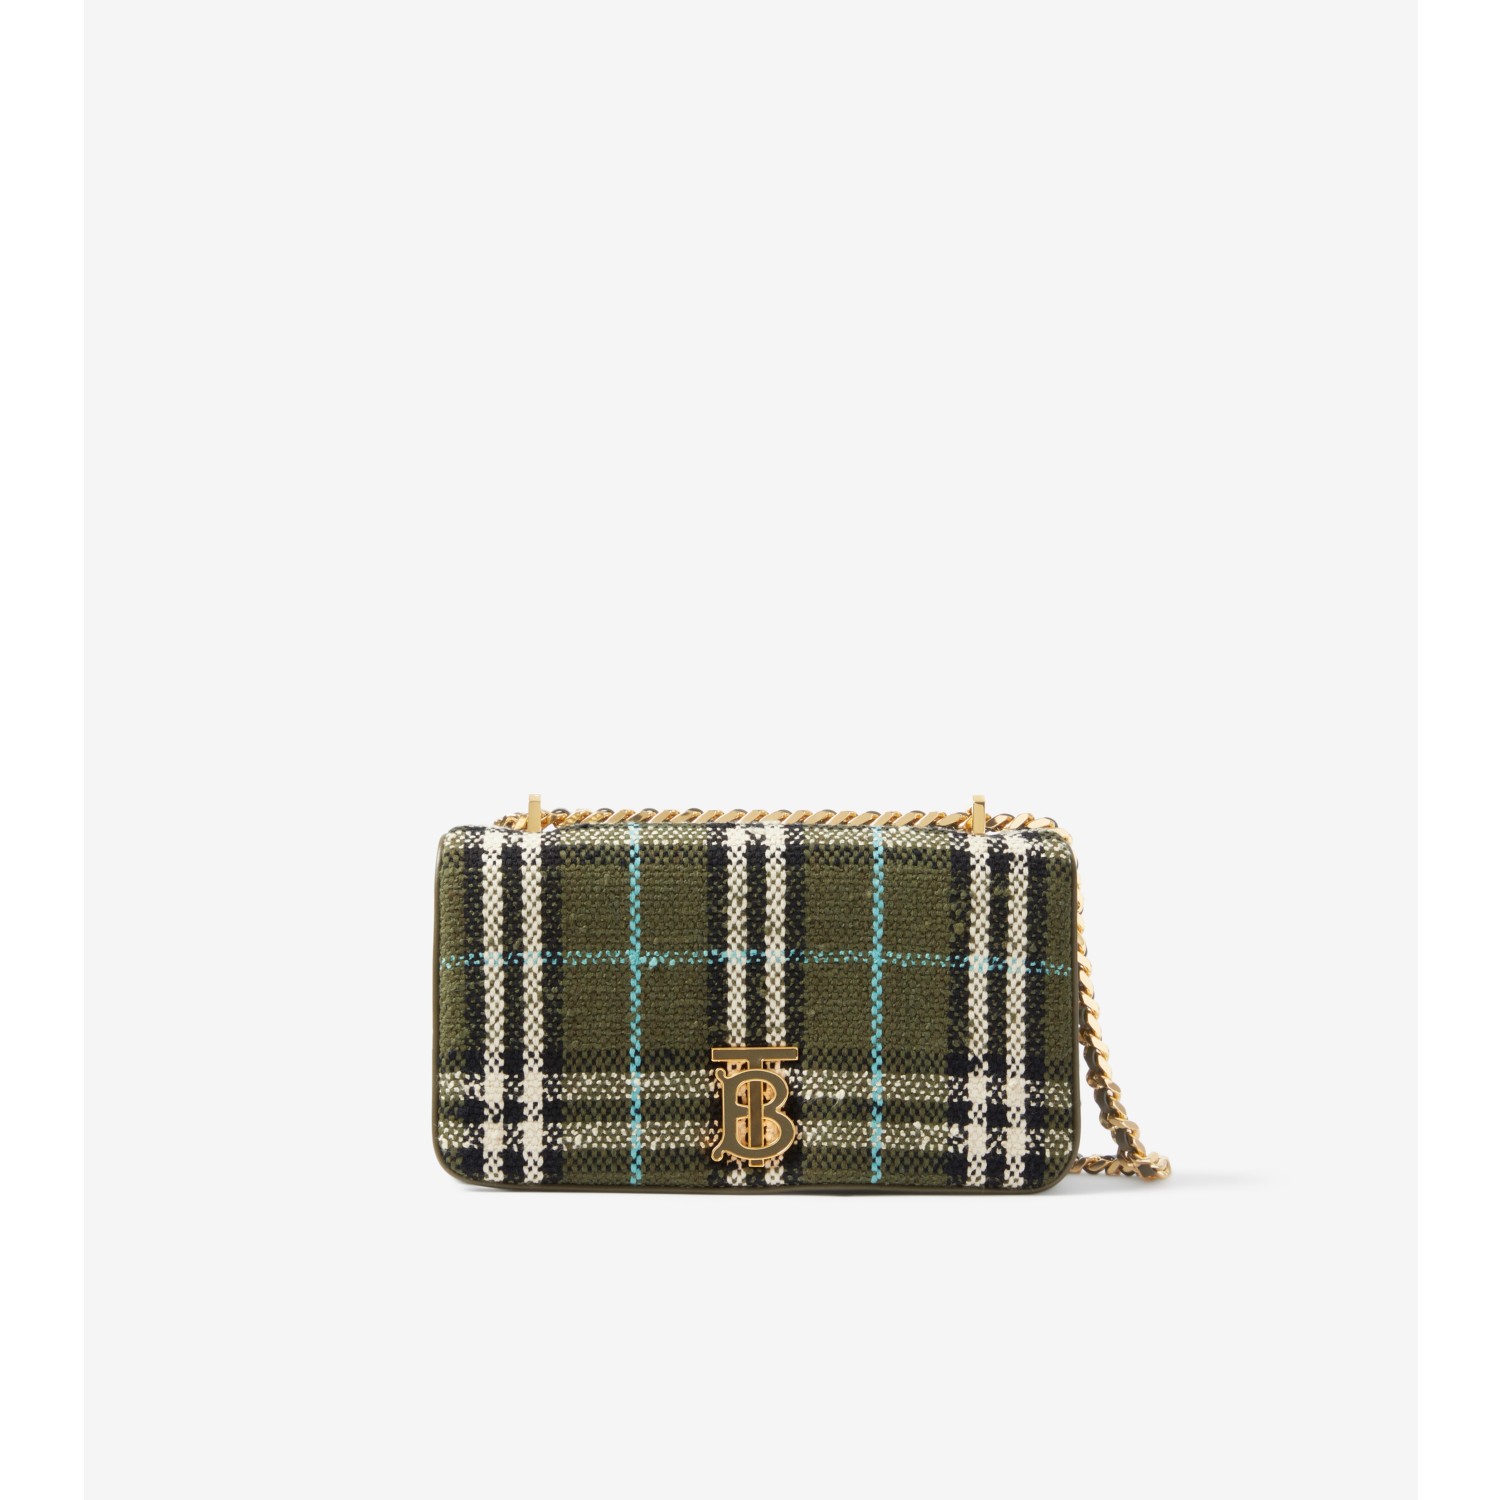 Burberry Bags for Women - Vestiaire Collective